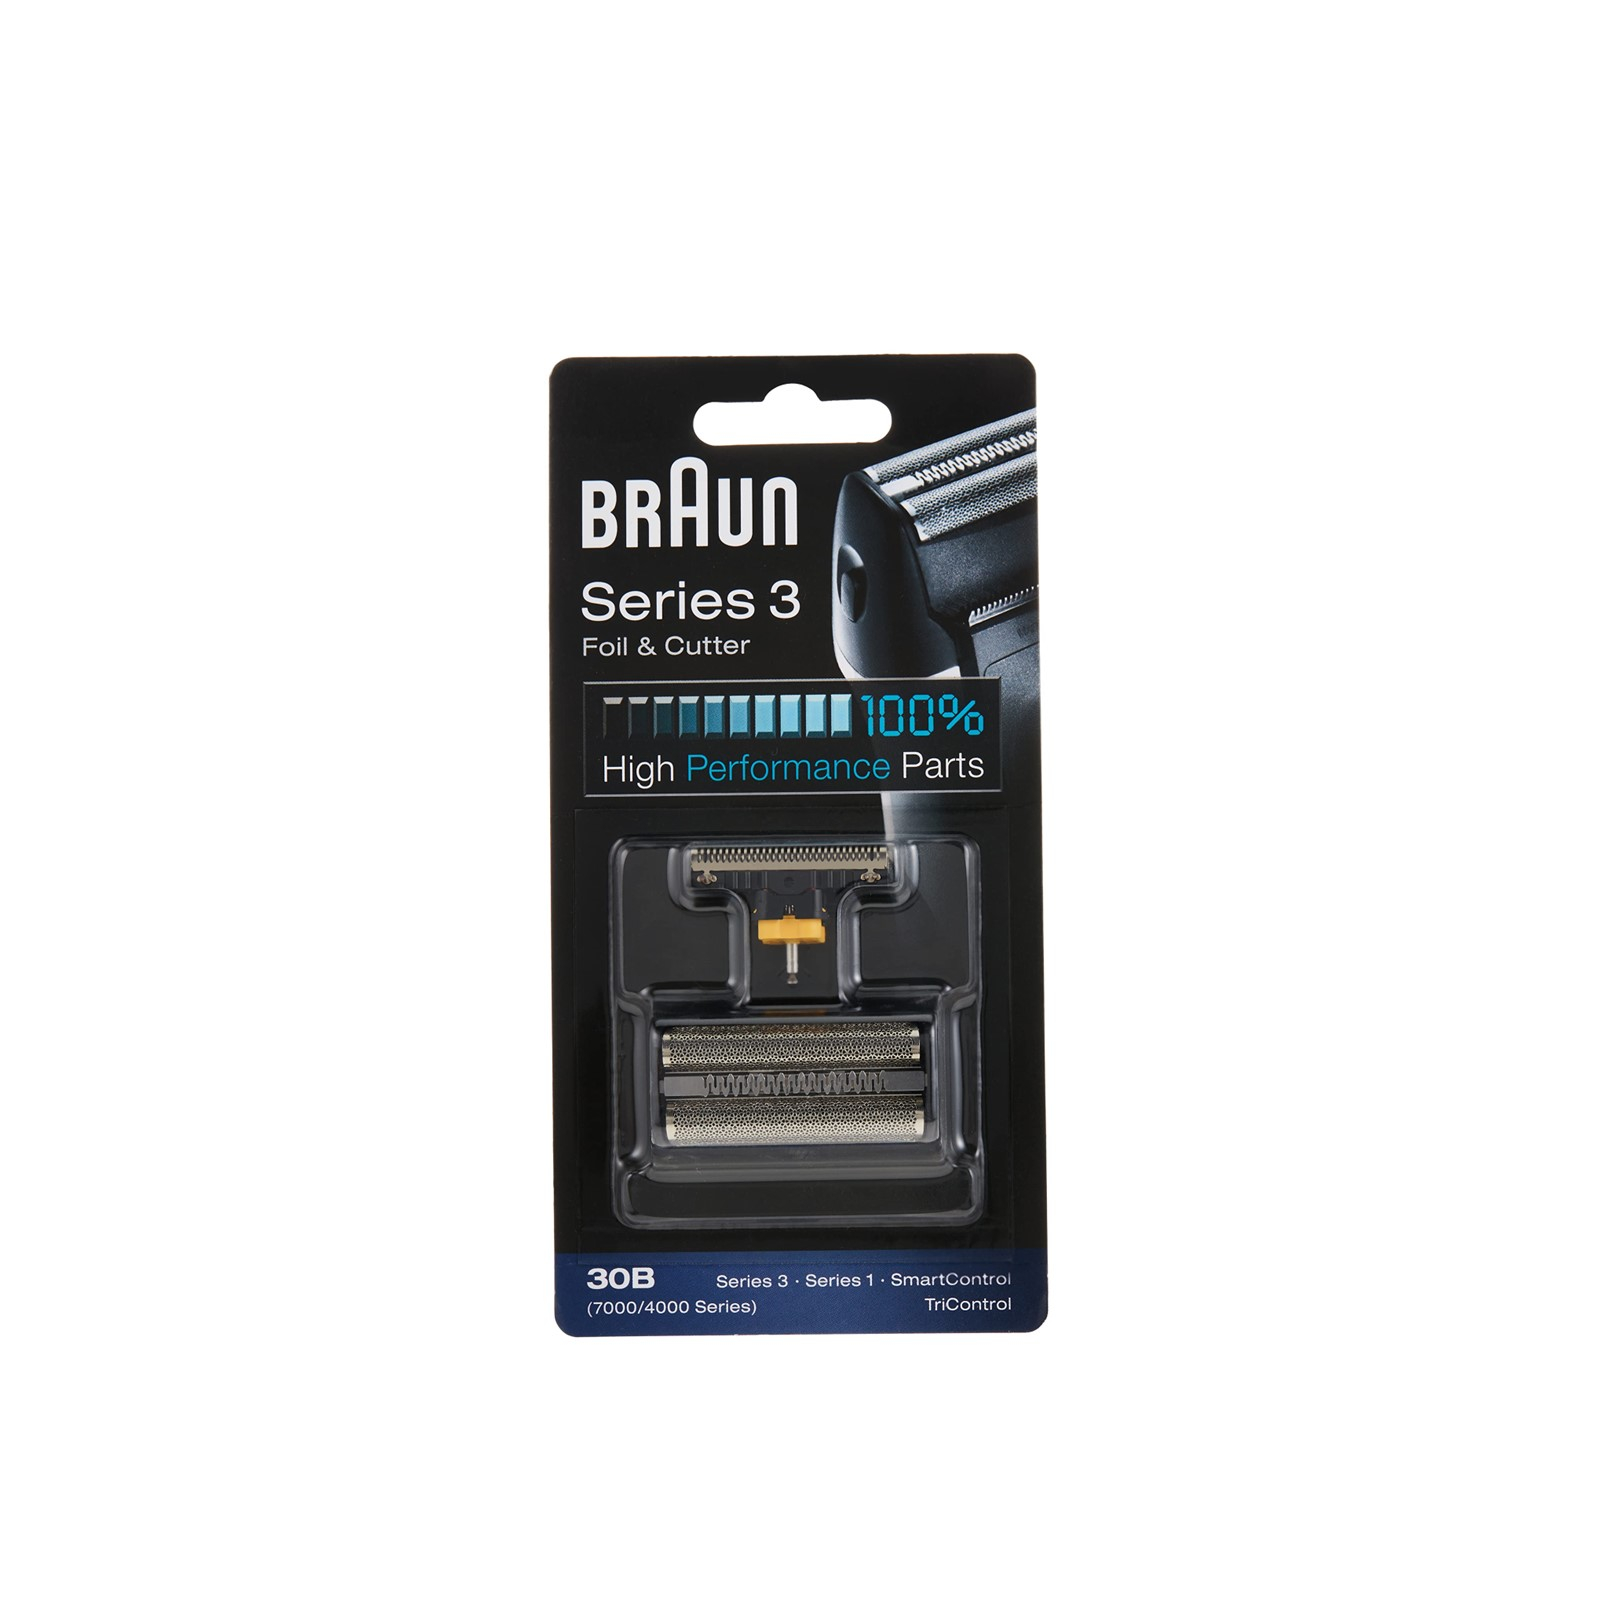 https://static.beautytocare.com/media/catalog/product/b/r/braun-series-3-electric-shaver-replacement-head-30b.jpg